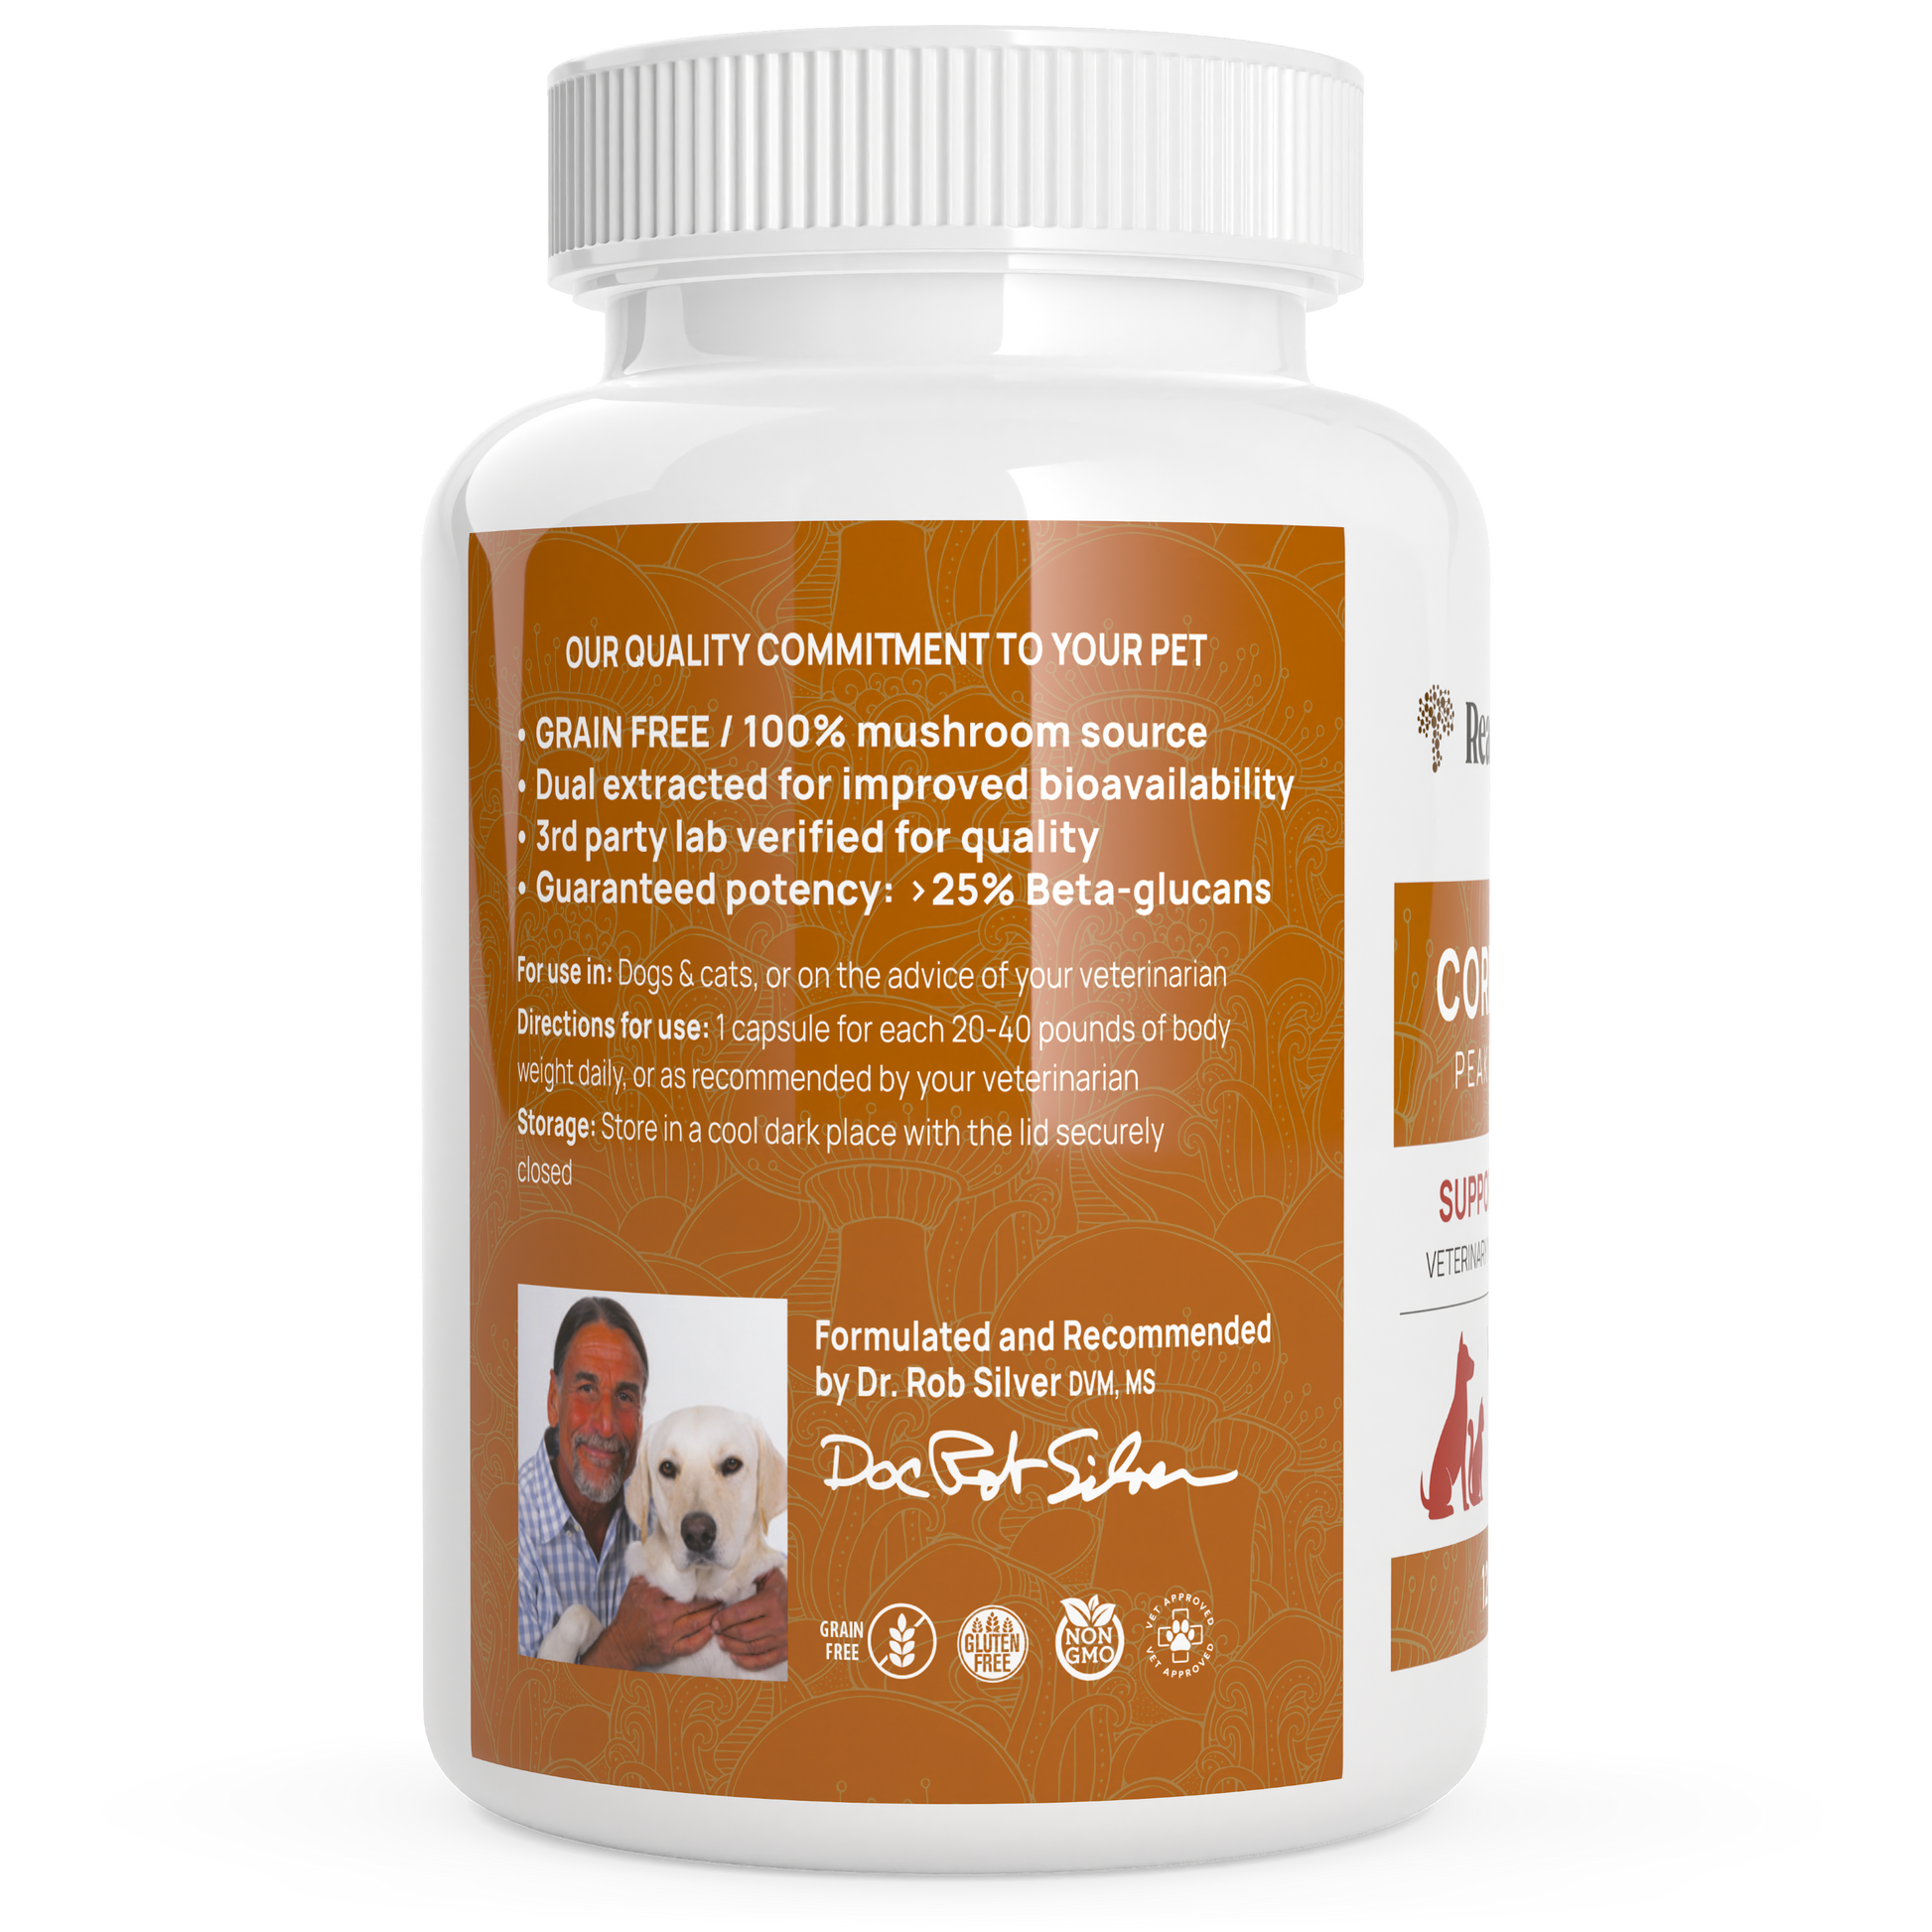 A bottle of Organic Cordyceps Extract Capsules for Pets from Real Mushrooms.